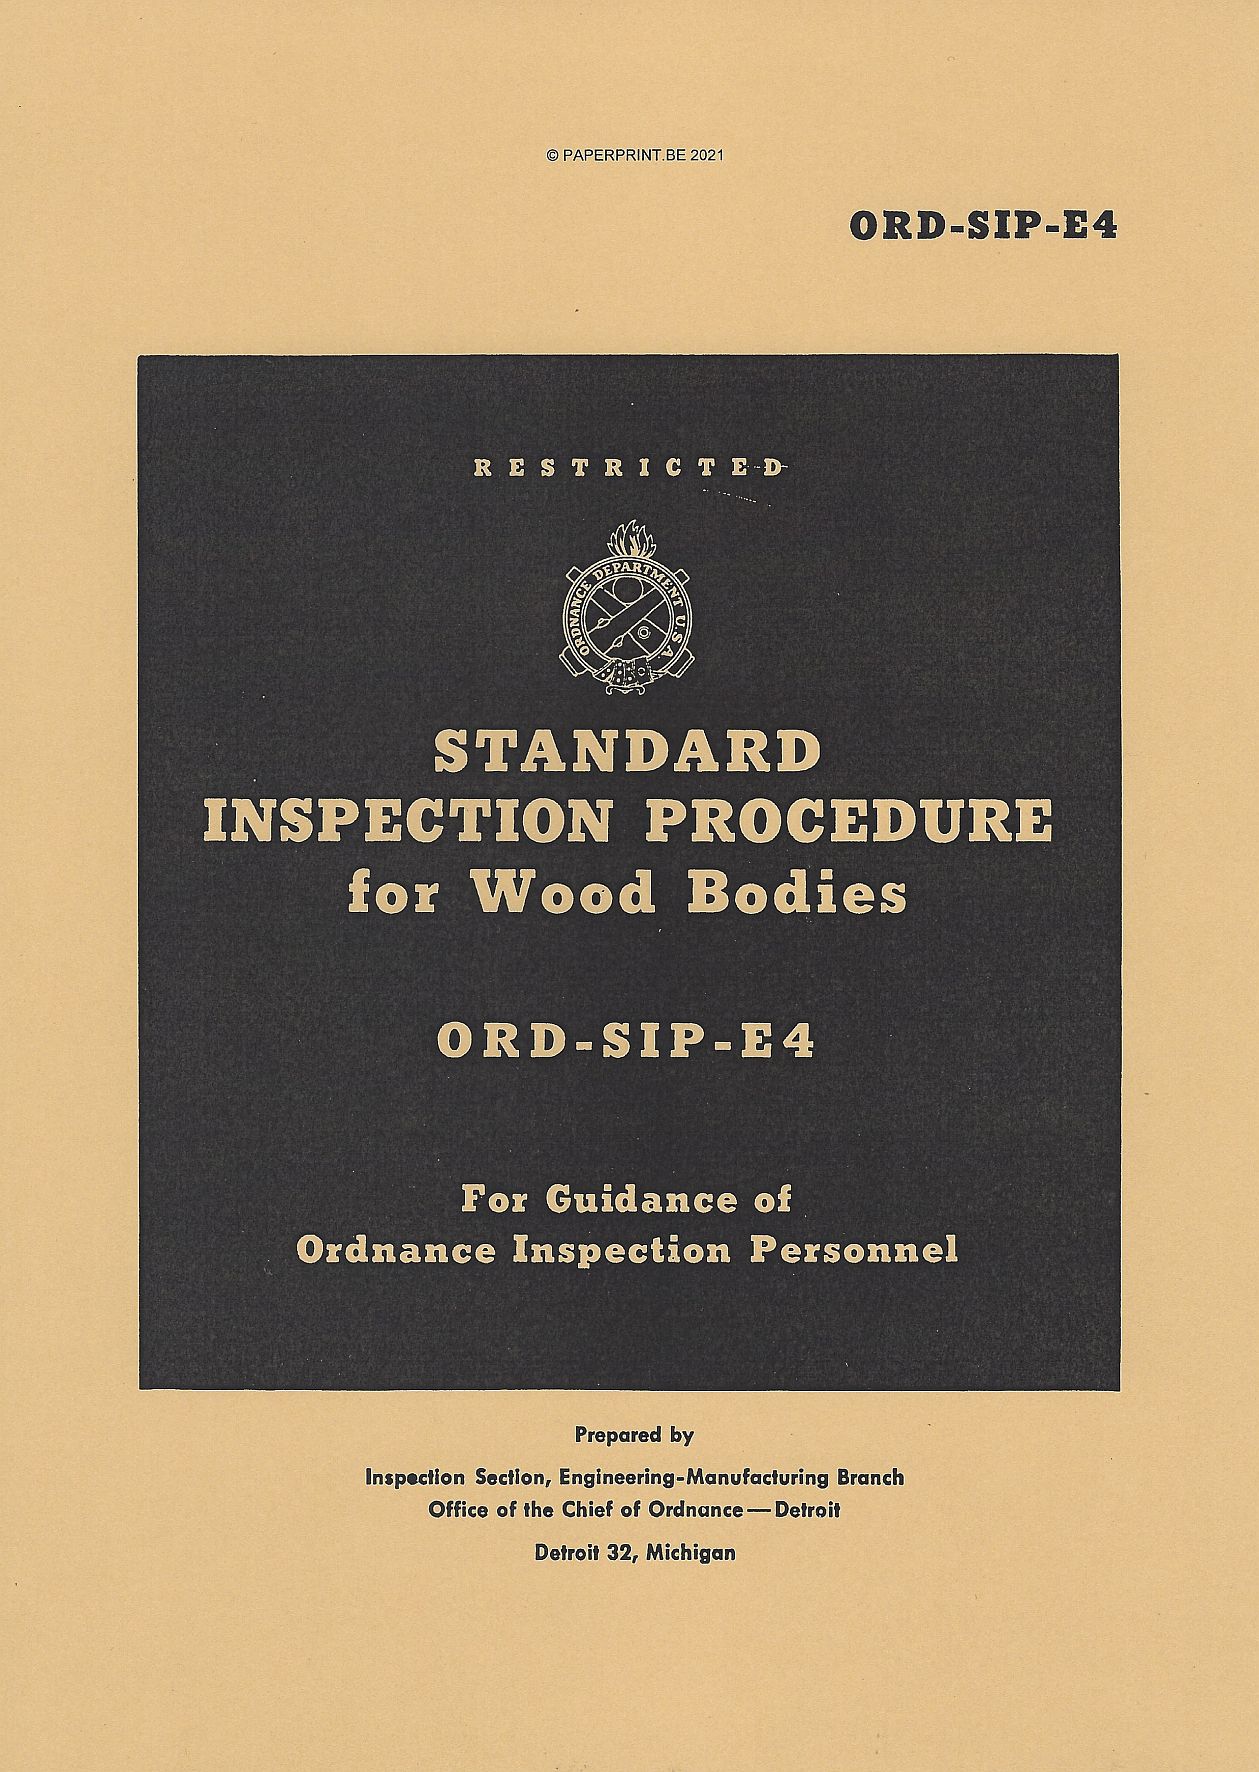 ORD-SIP-E4 STANDARD INSPECTION PROCEDURE FOR WOOD BODIES US